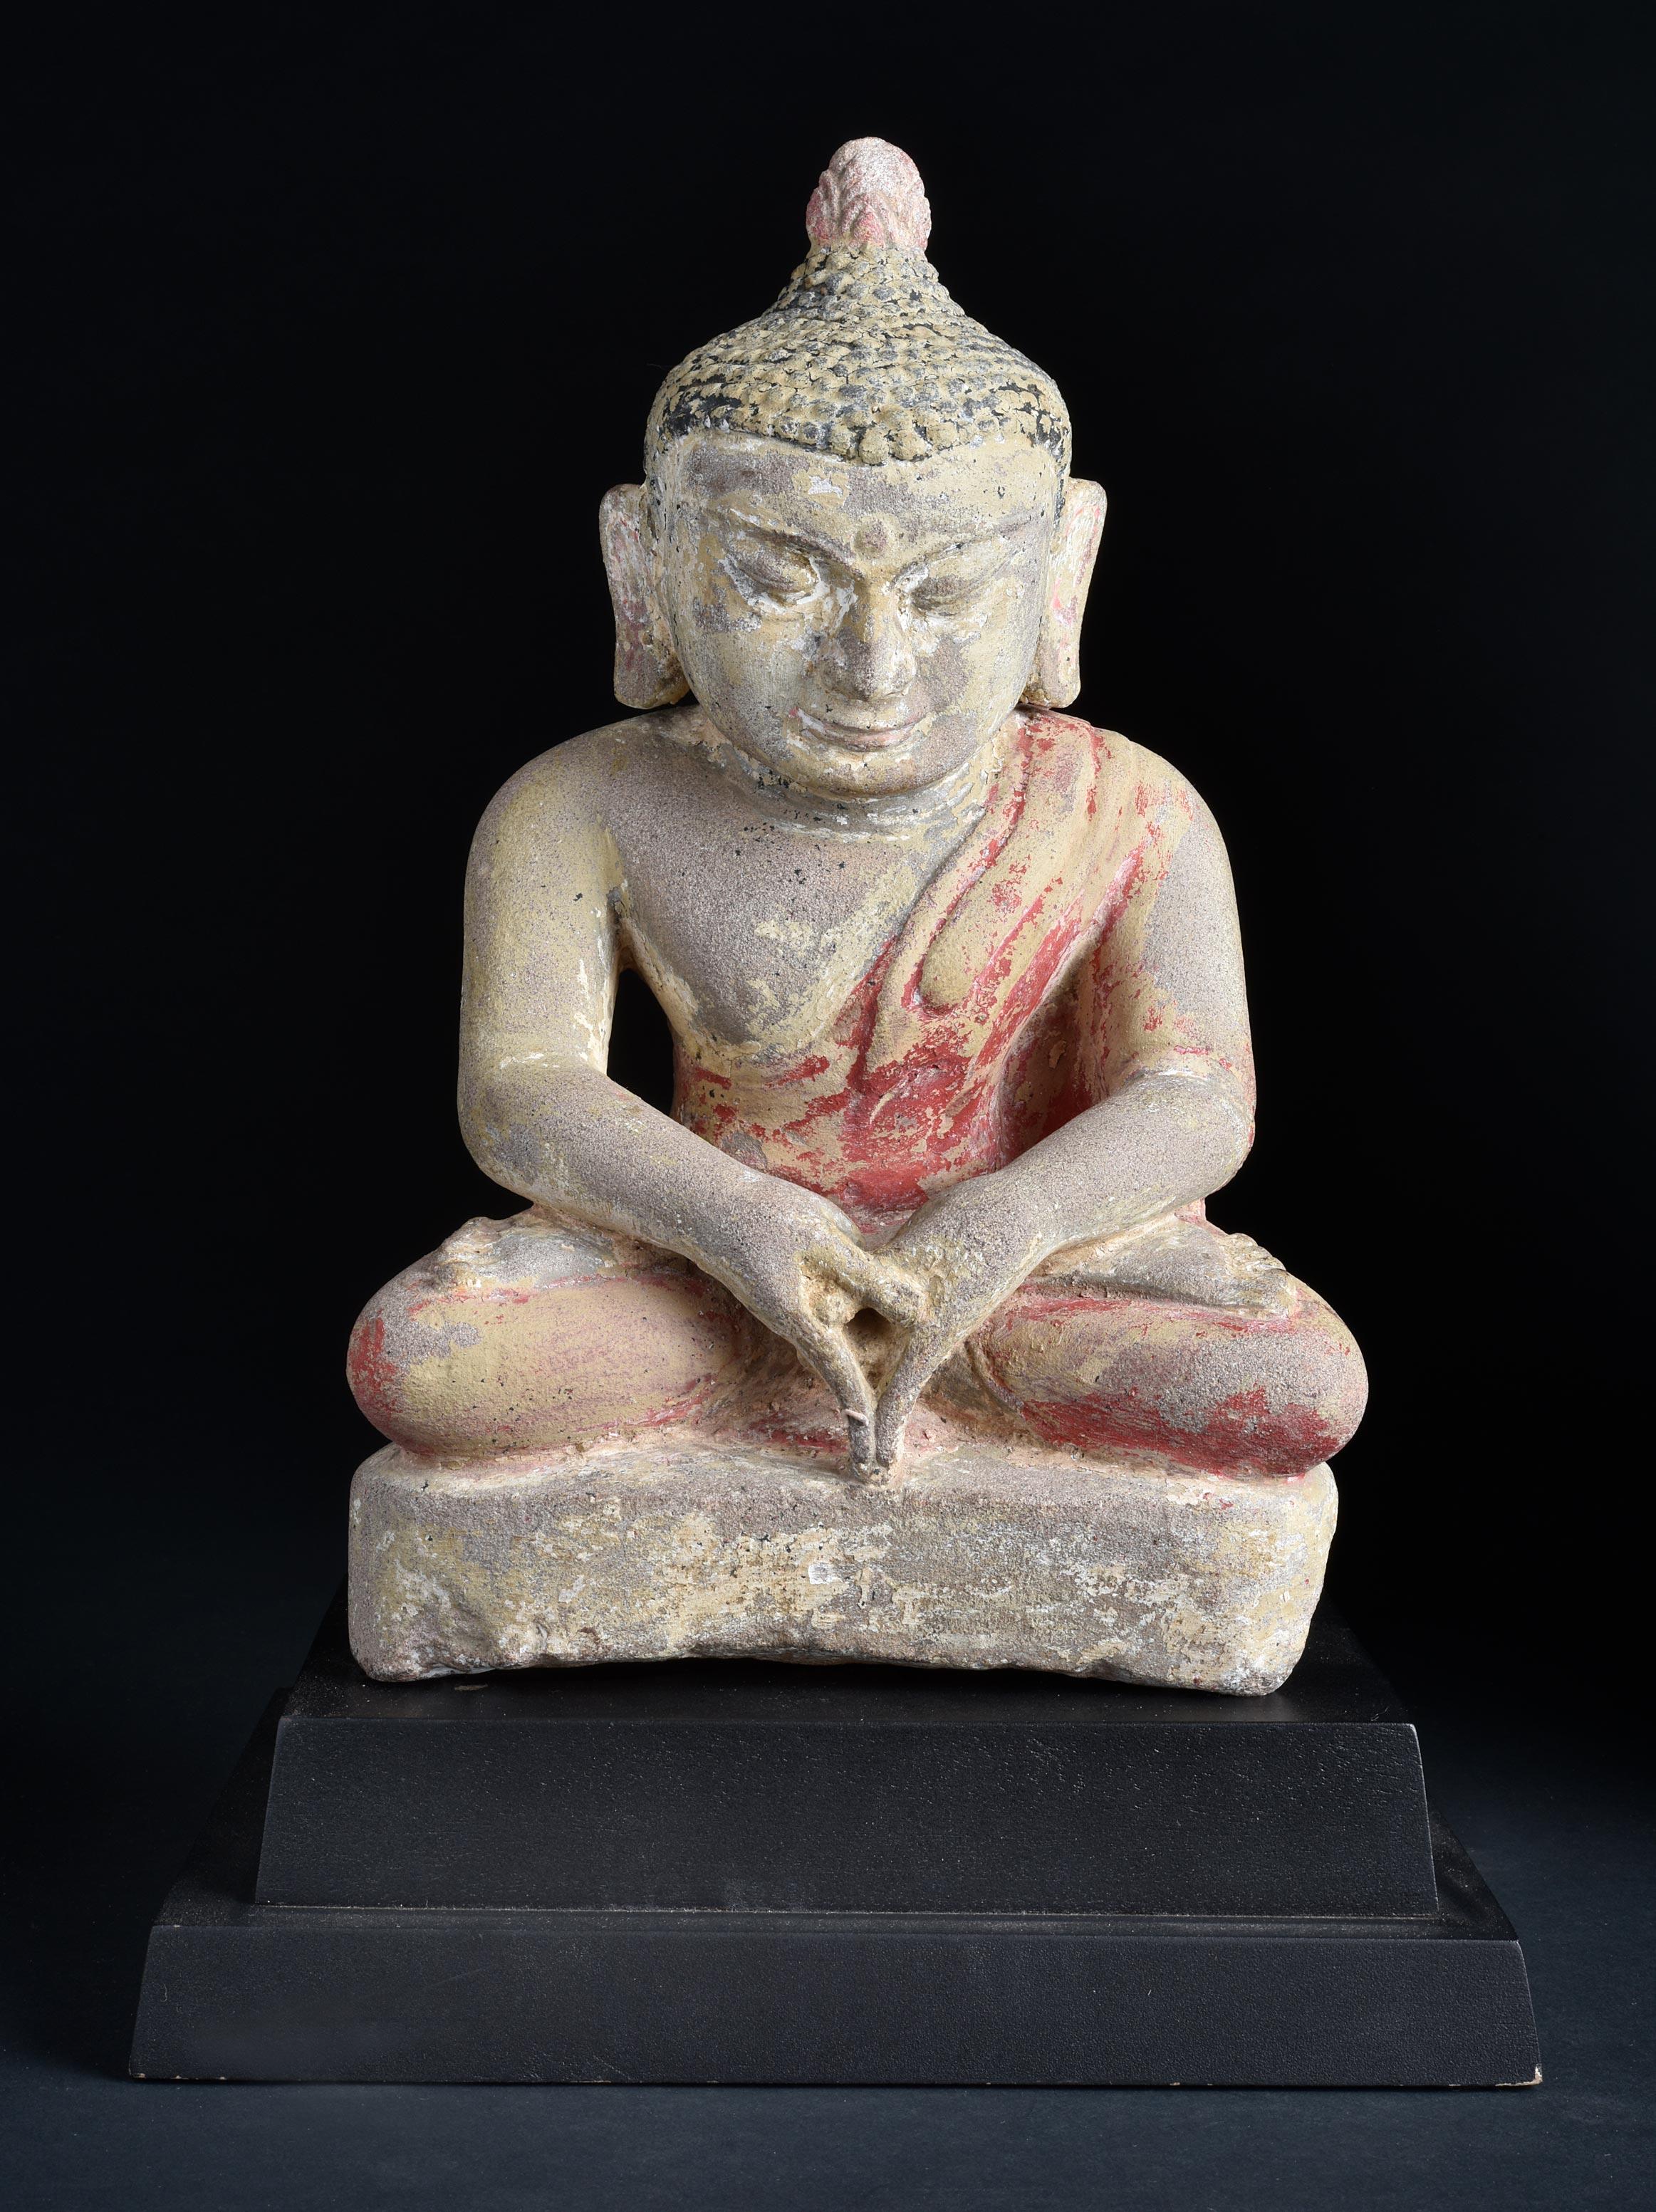 Finest 12/13thC Burmese Pagan Stone Buddha in deep concentration. Covering the body are remains of red, black, and white polychrome. The vast majority of Burmese stone pieces are modern emulations. This is the real thing. Powerful presence that